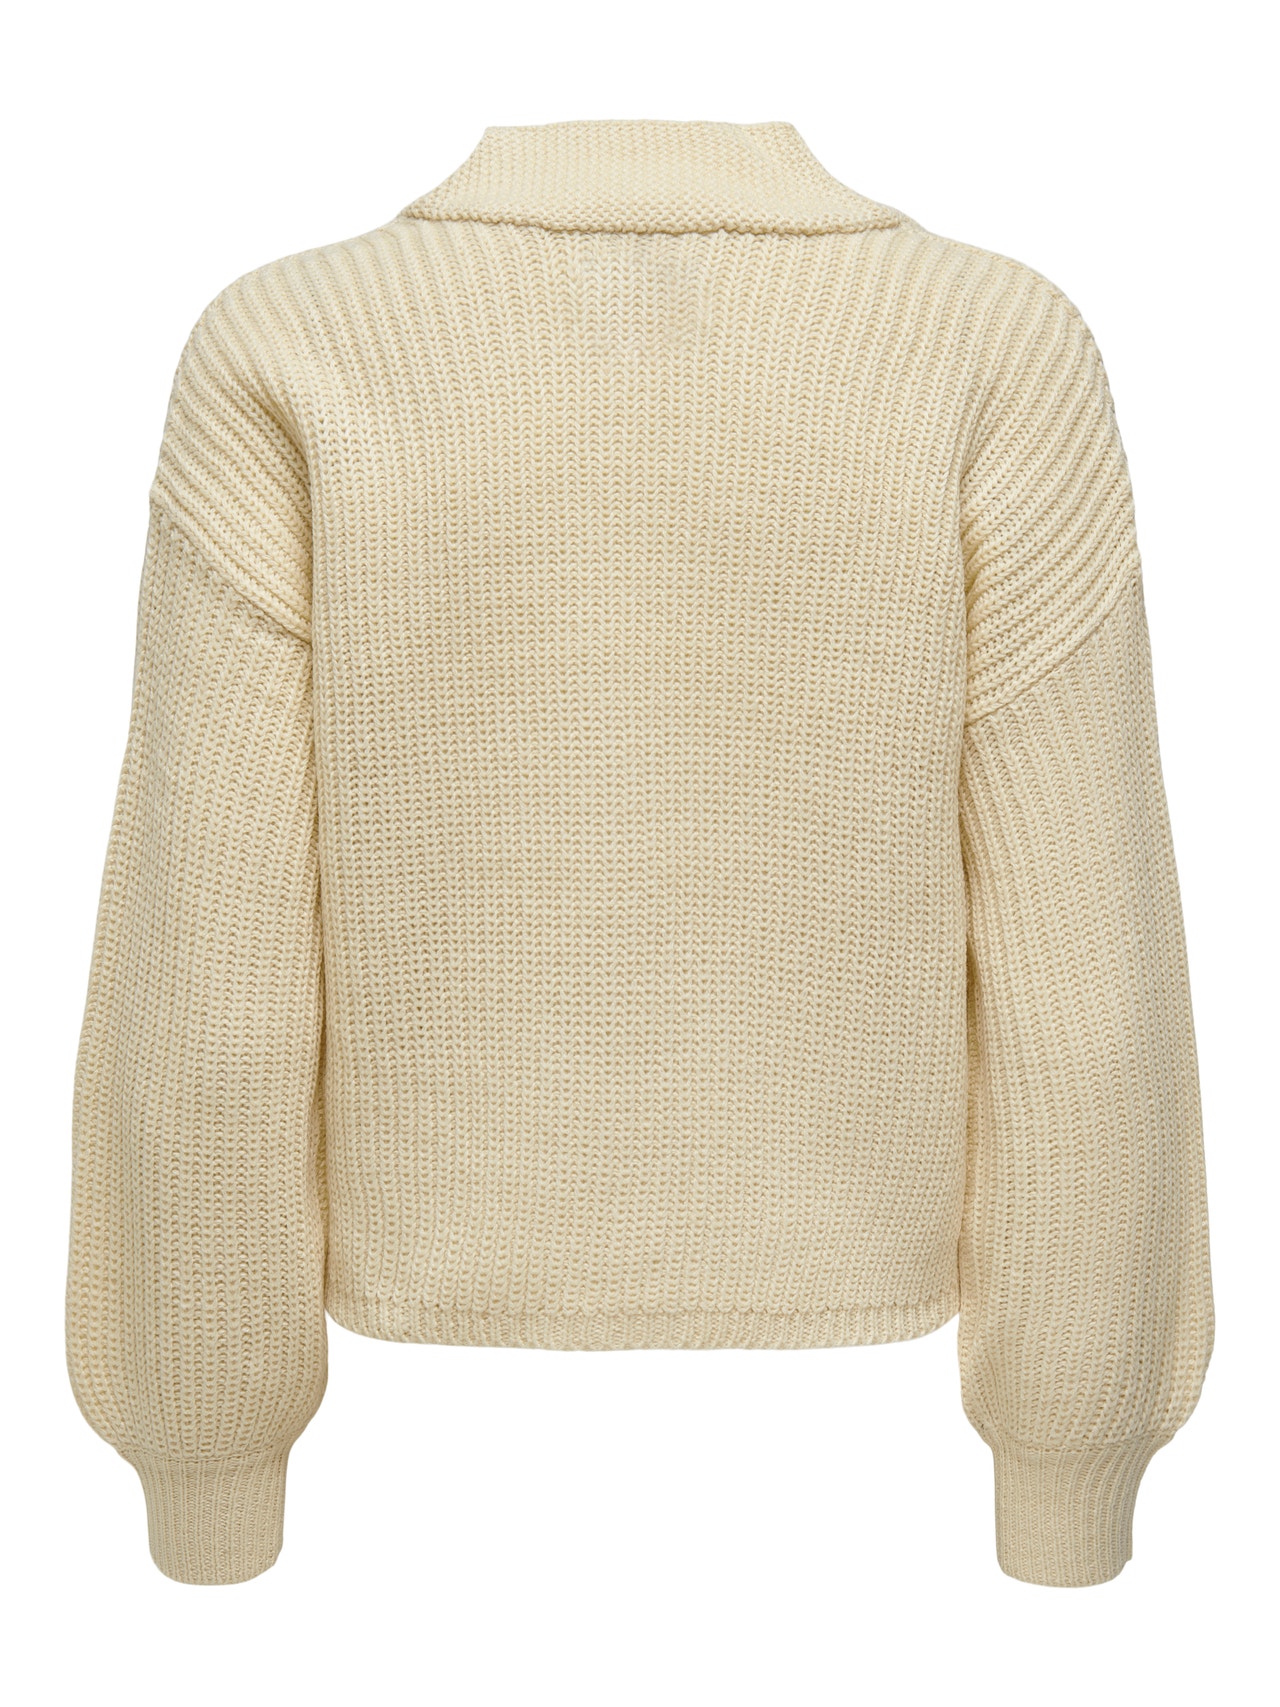 ONLY Couleur unie Cardigan en maille -Oatmeal - 15252685